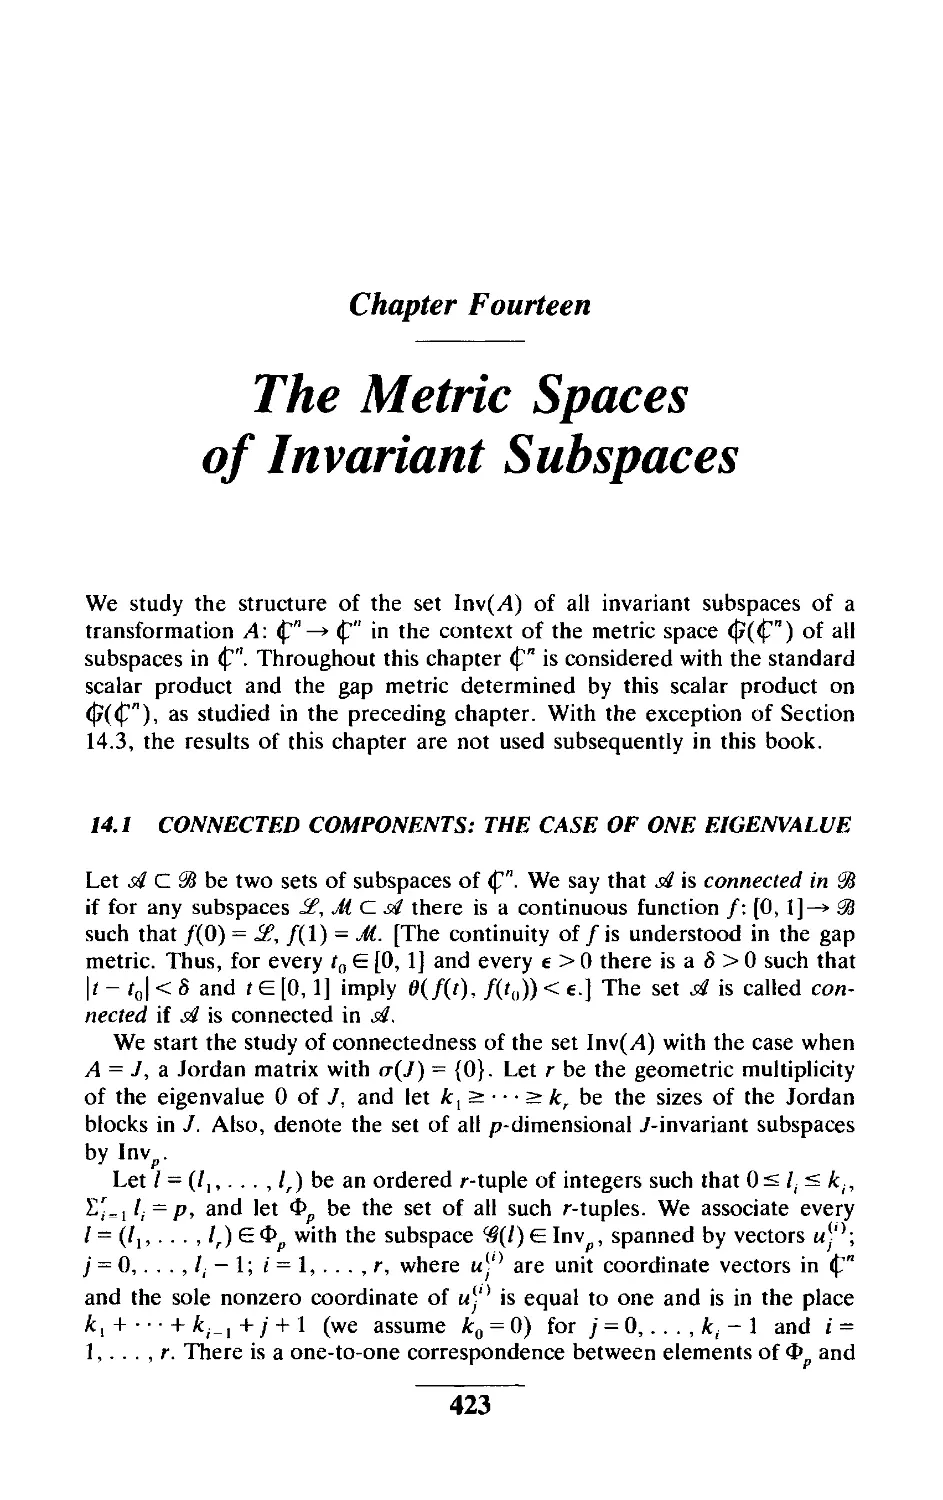 Chapter Fourteen The Metric Spaces of Invariant Subspaces